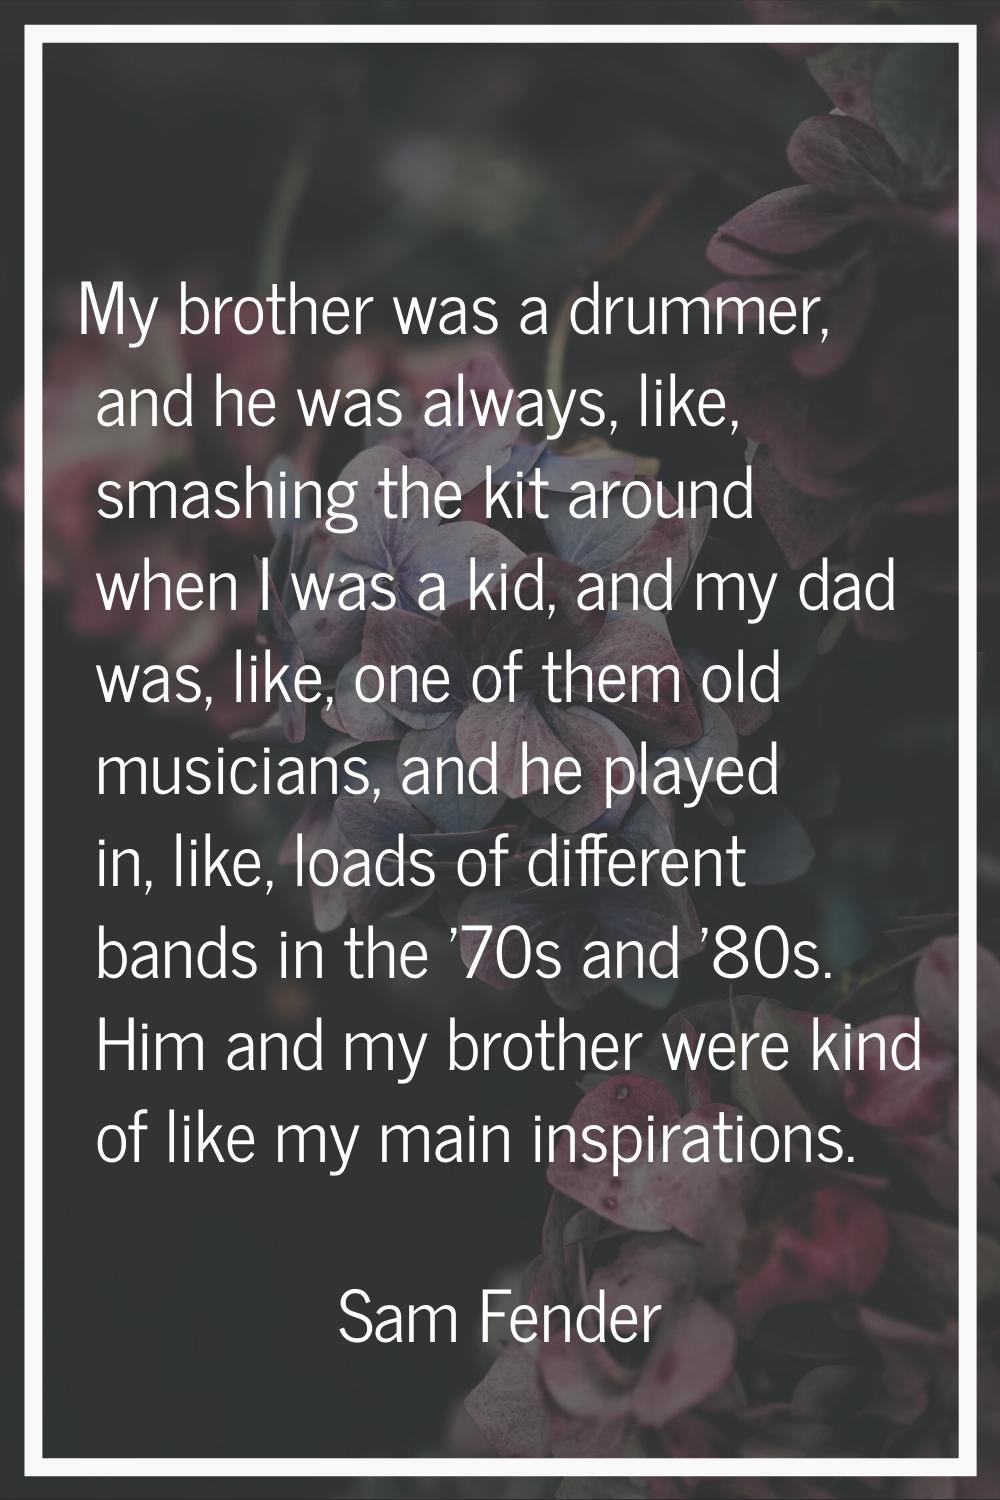 My brother was a drummer, and he was always, like, smashing the kit around when I was a kid, and my